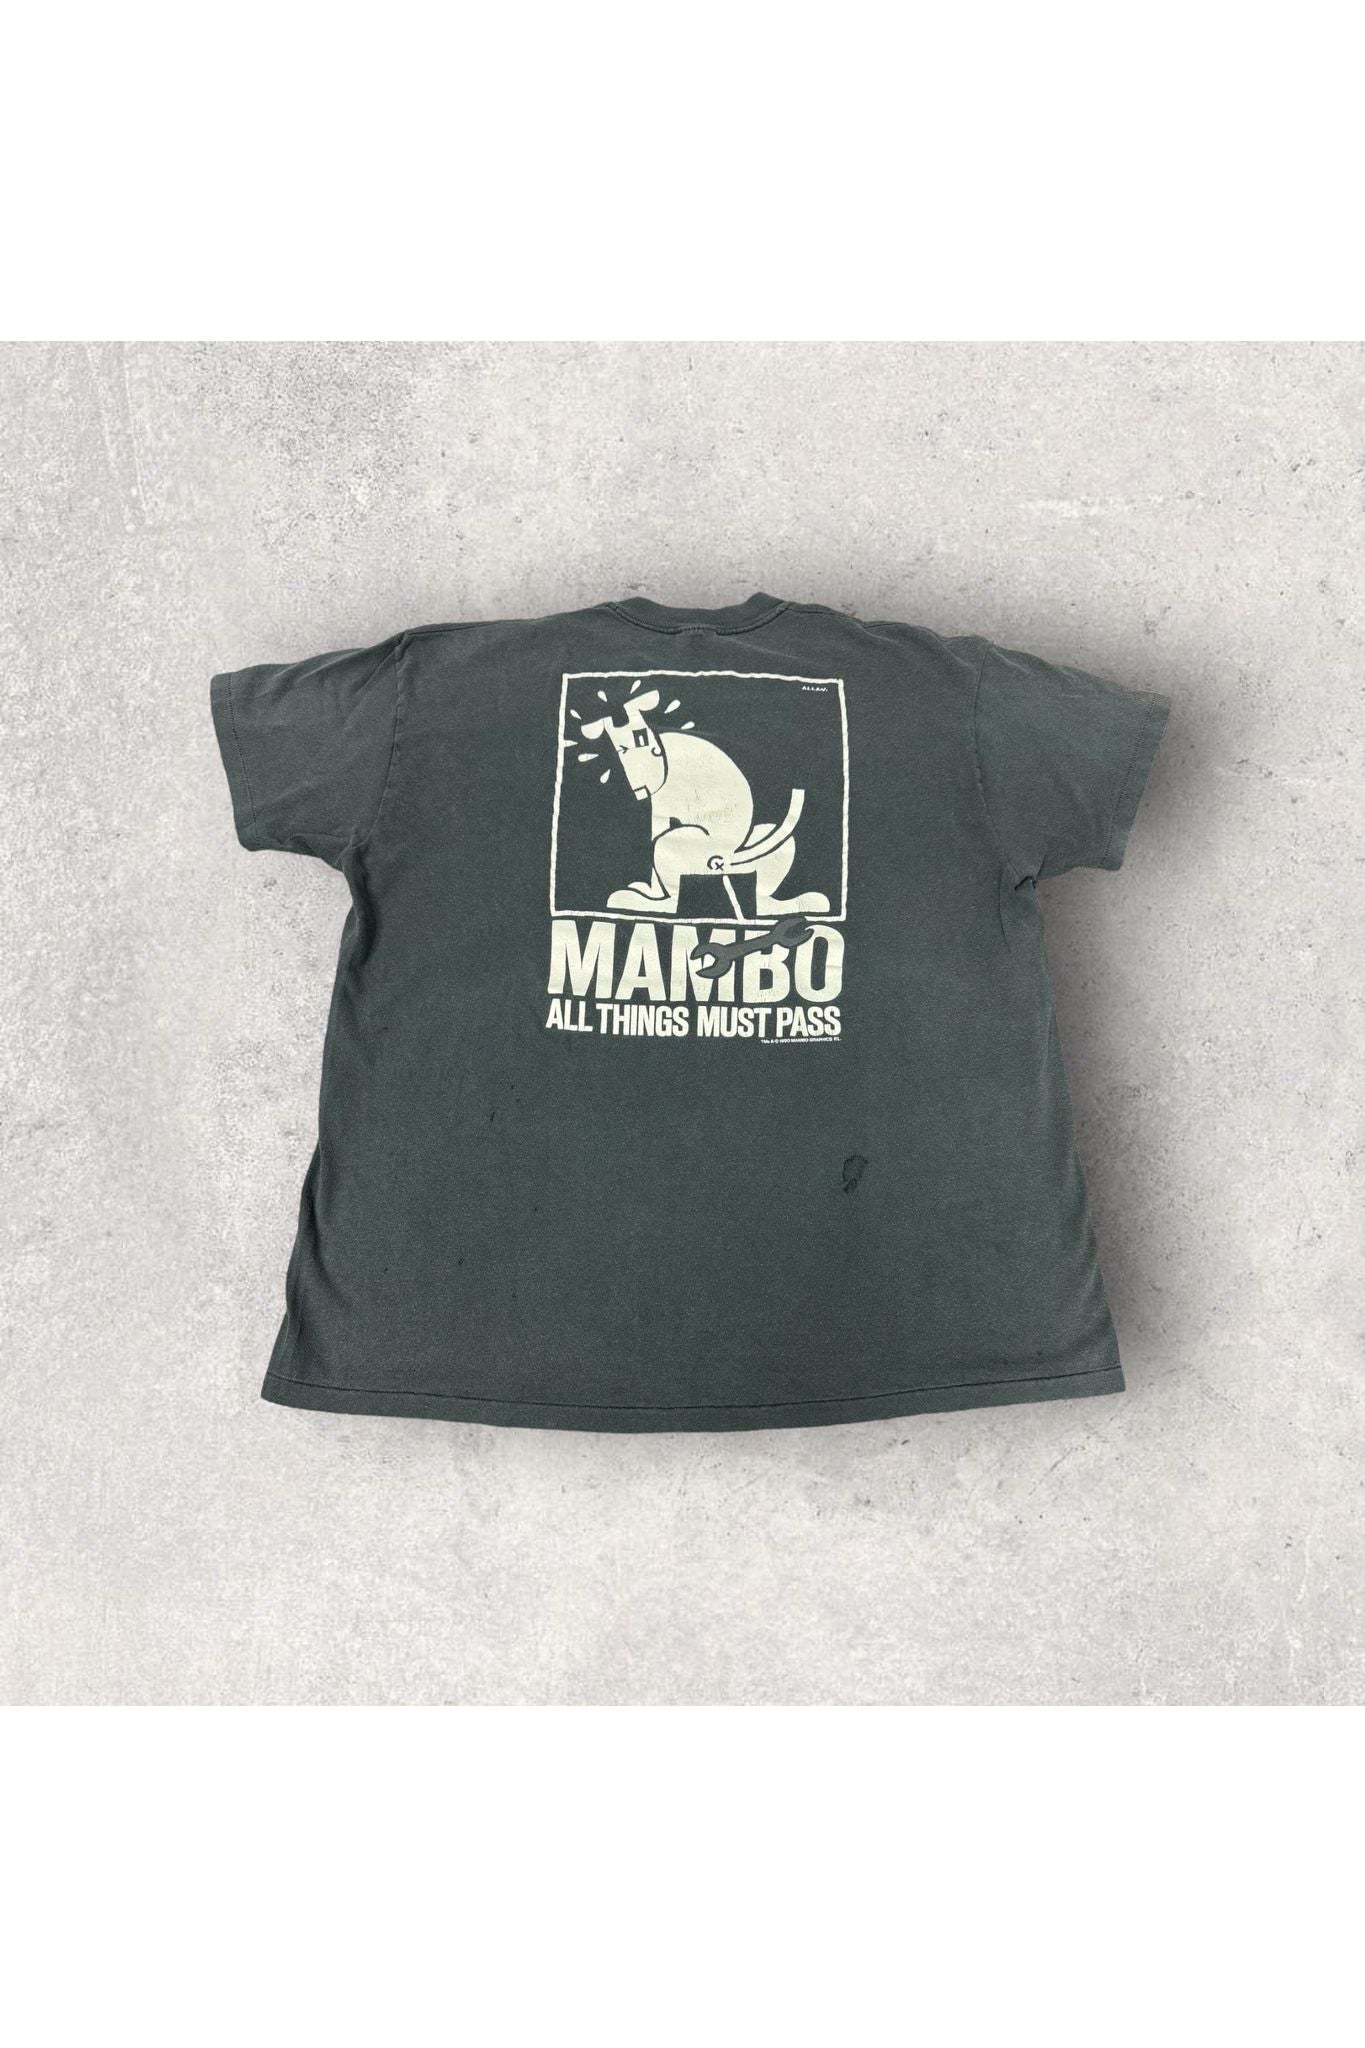 Vintage Single Stitch 1990 Mambo All Things Must Pass Tee- XL